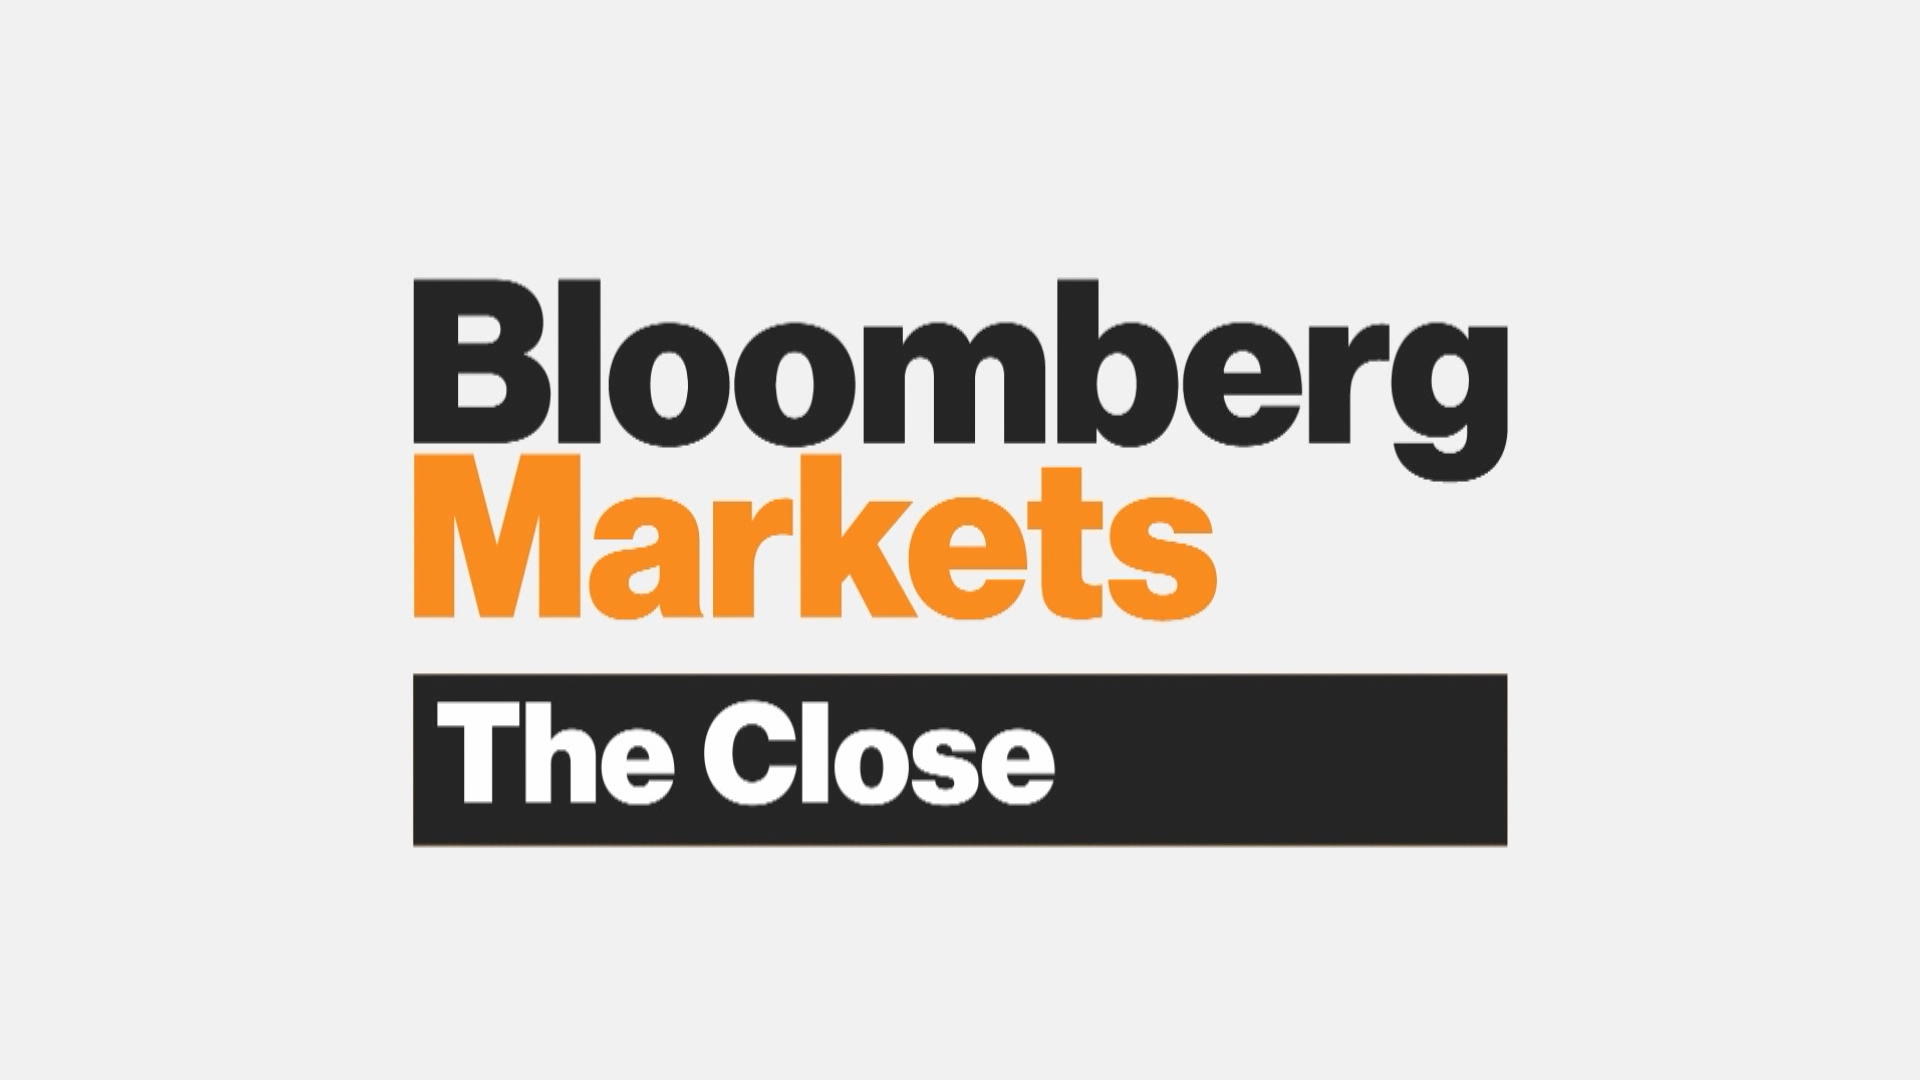 Bloomberg Markets The Close Full Show 09 10 2020 Bloomberg - roblox avatar evolution 2008 to 2017